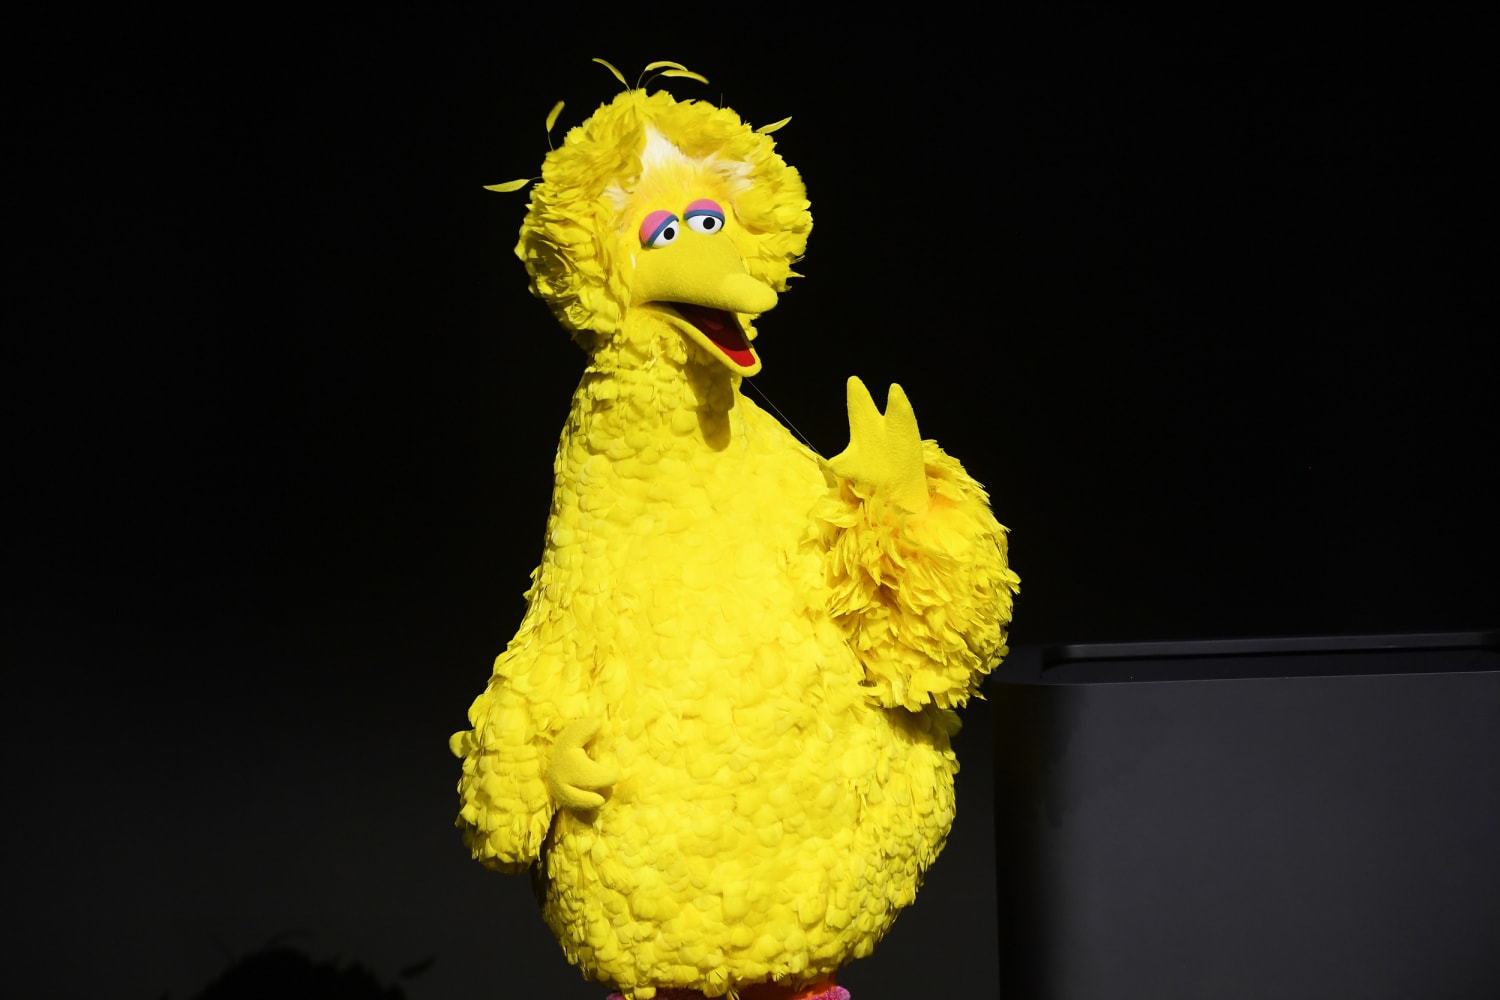 Big Bird vaccine announcement sparks backlash from Conservatives, GOP